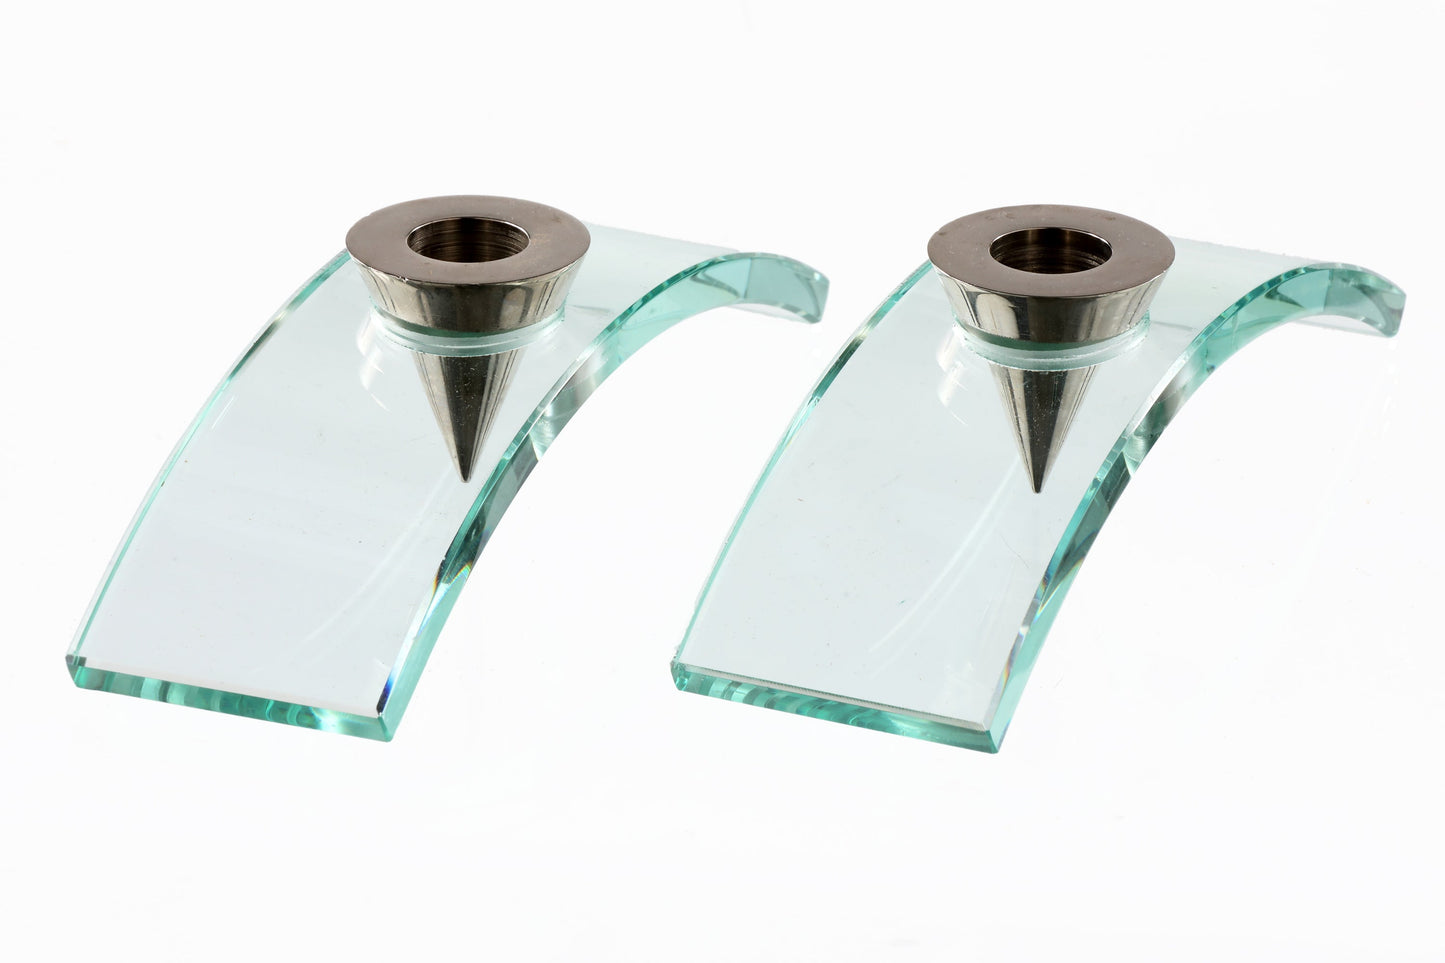 Pair of nile green glass candlesticks